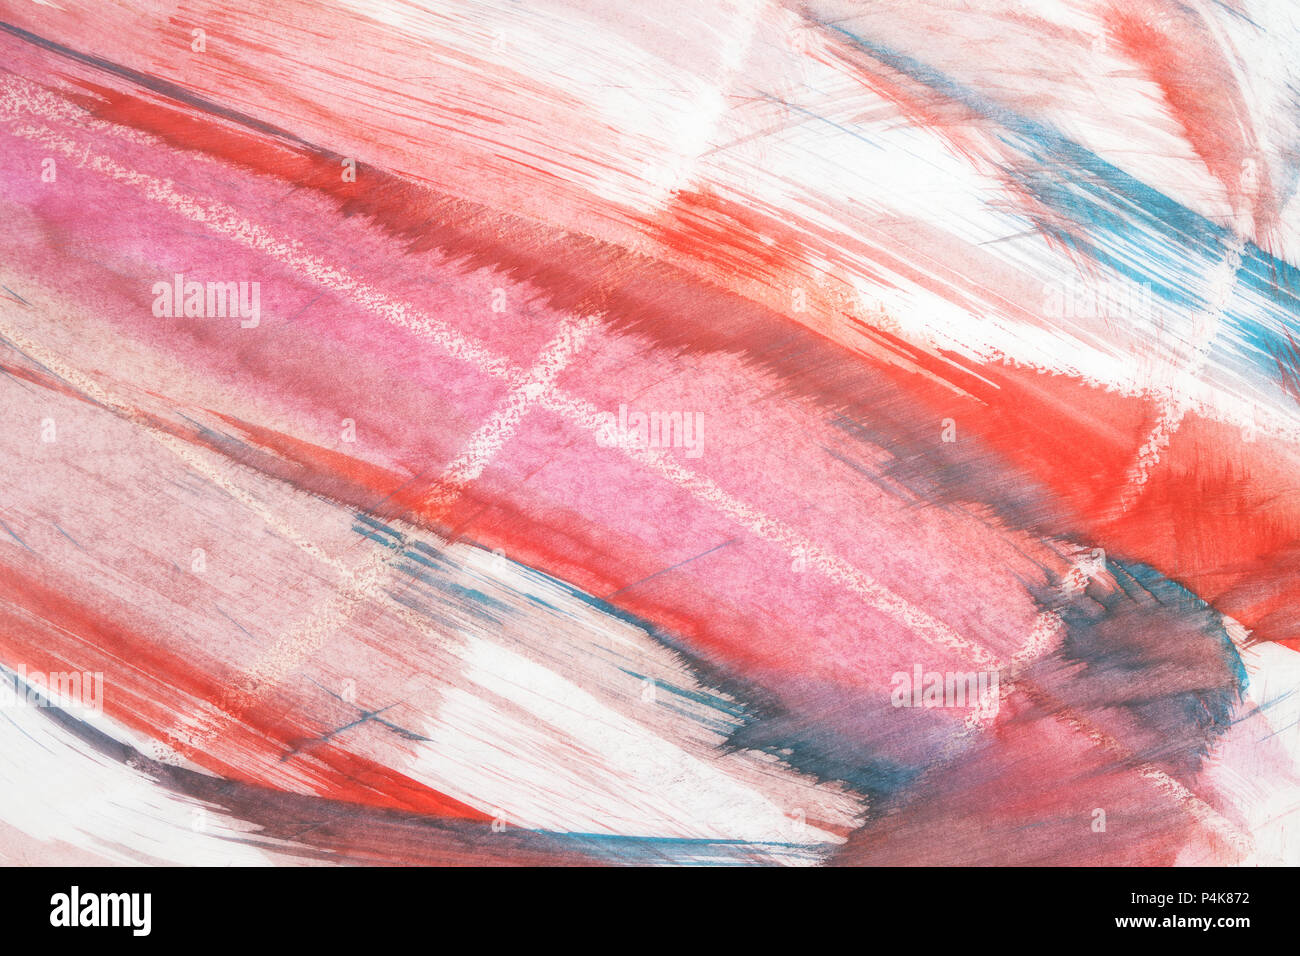 Colorful water color on a paper. Abstract hand drawn watercolor background. Stock Photo